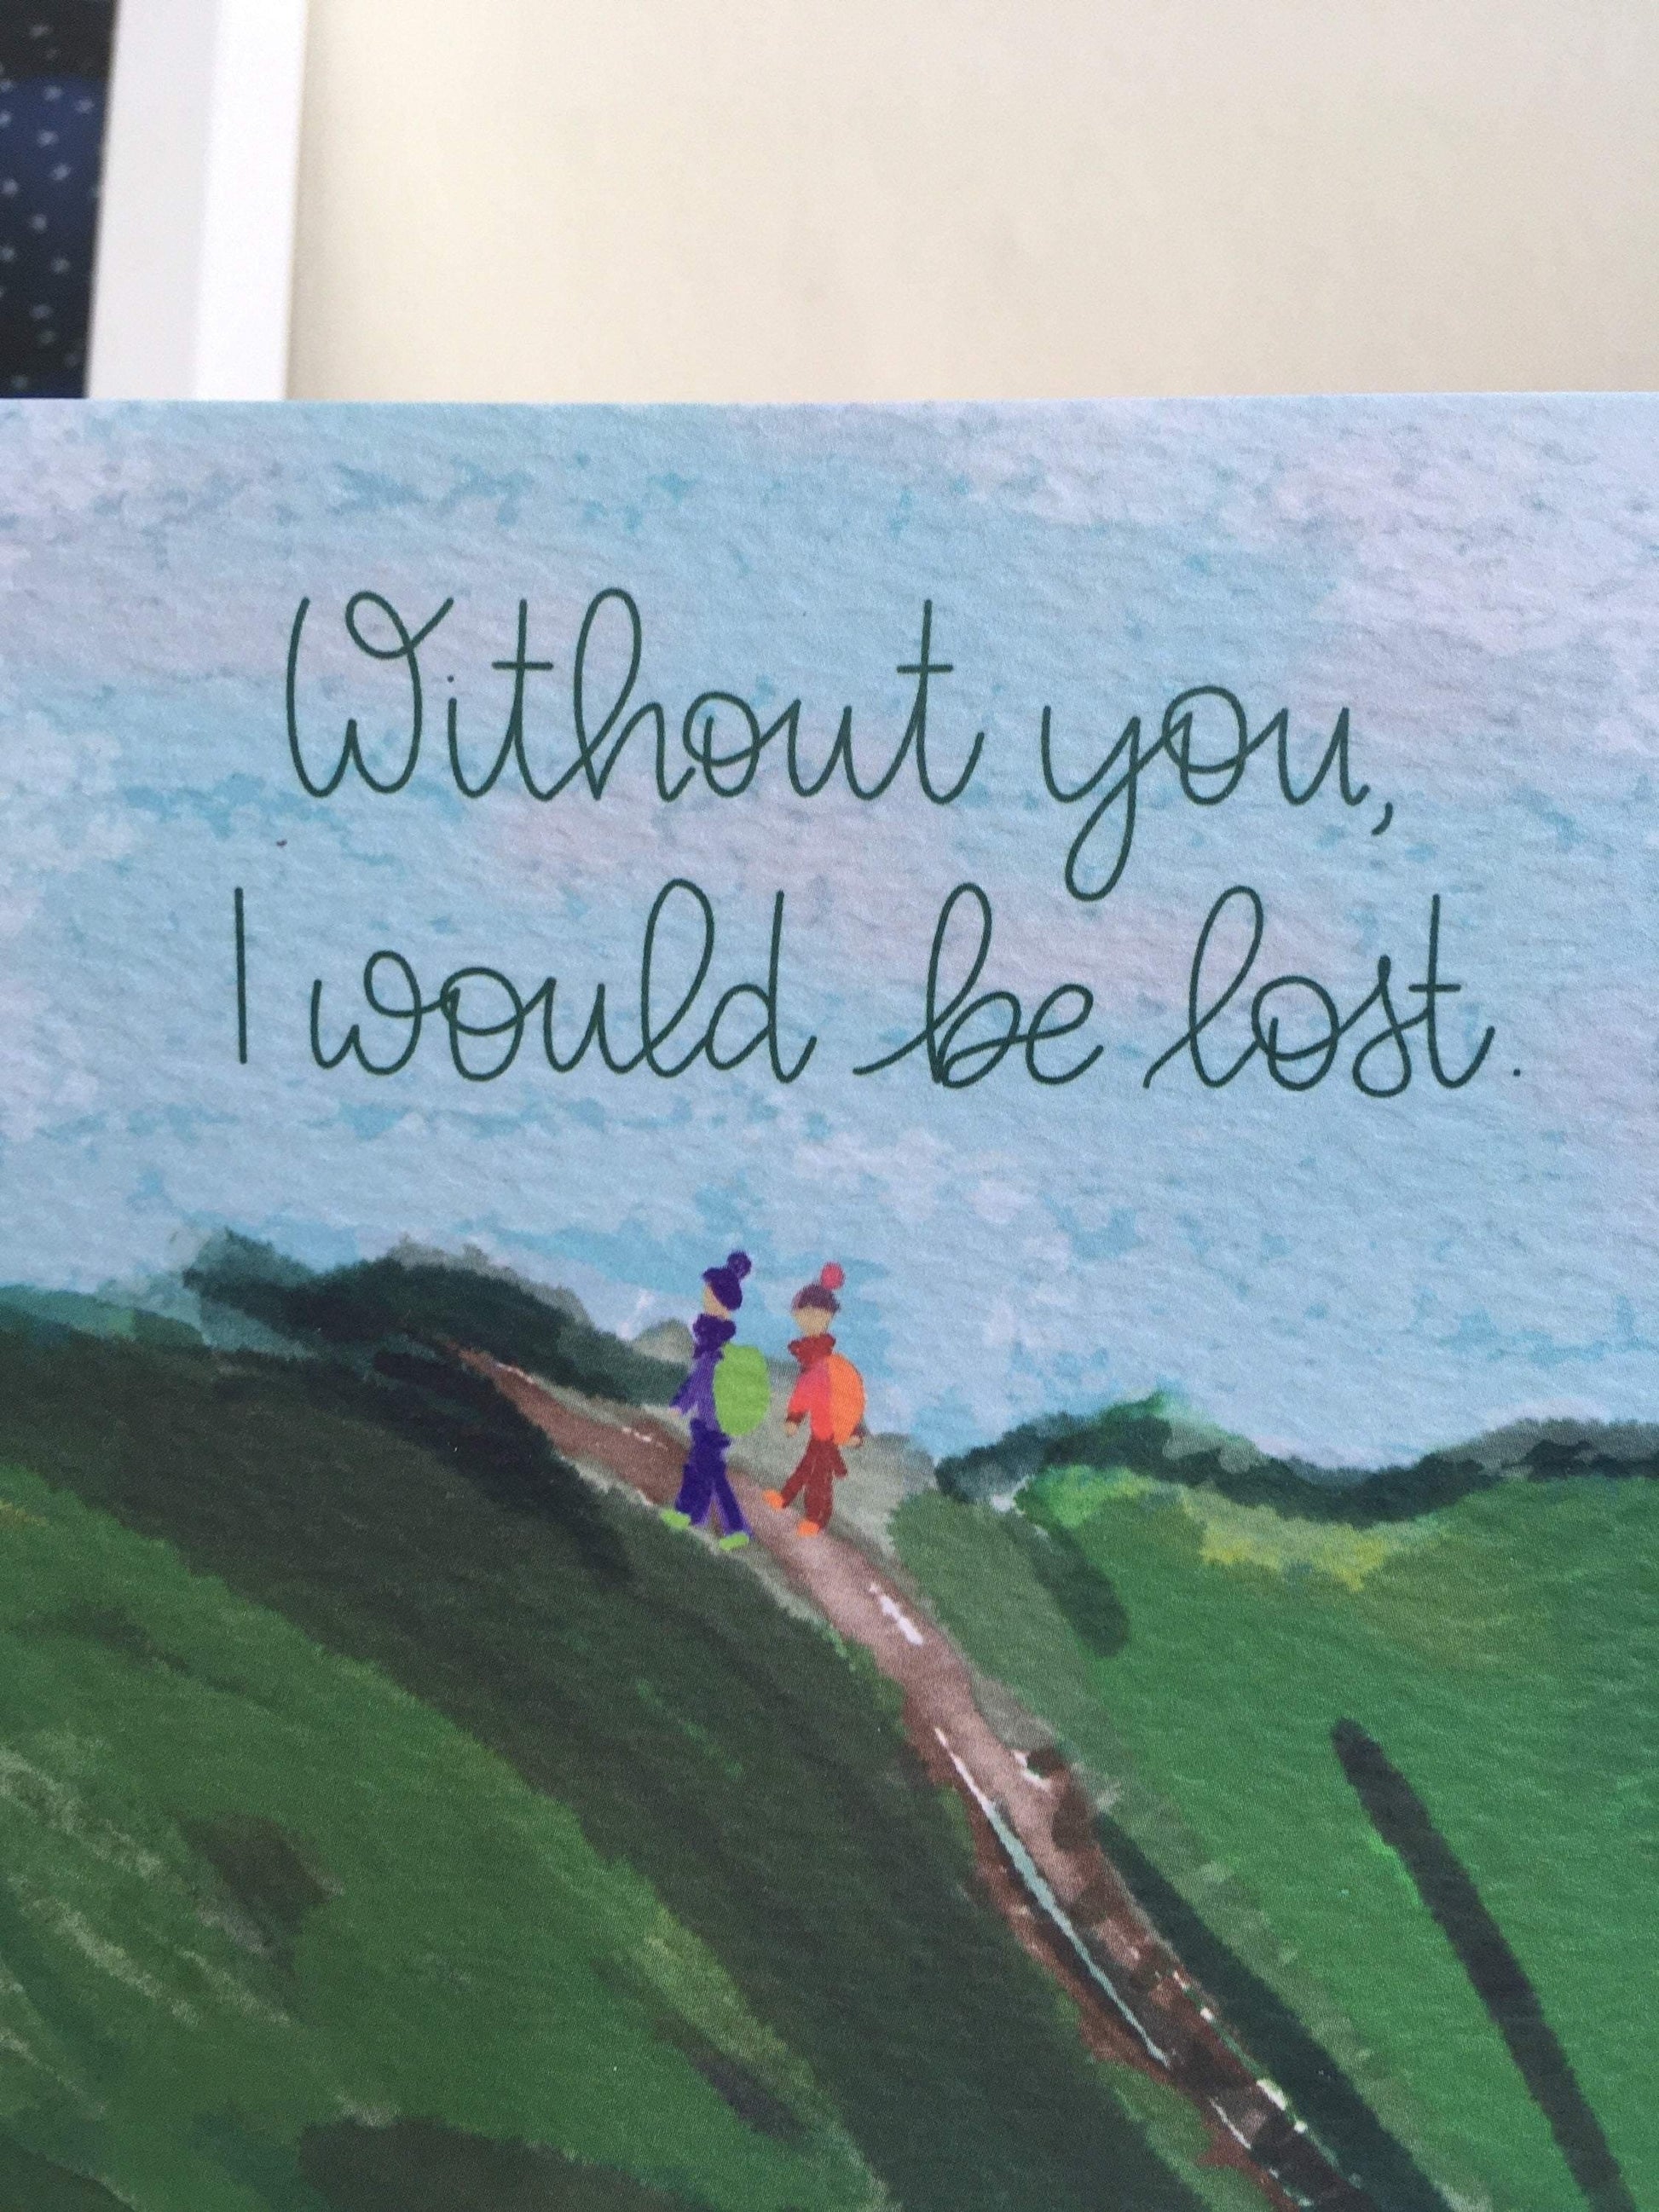 And Hope Designs Cards Without you I would be lost hillwalking card